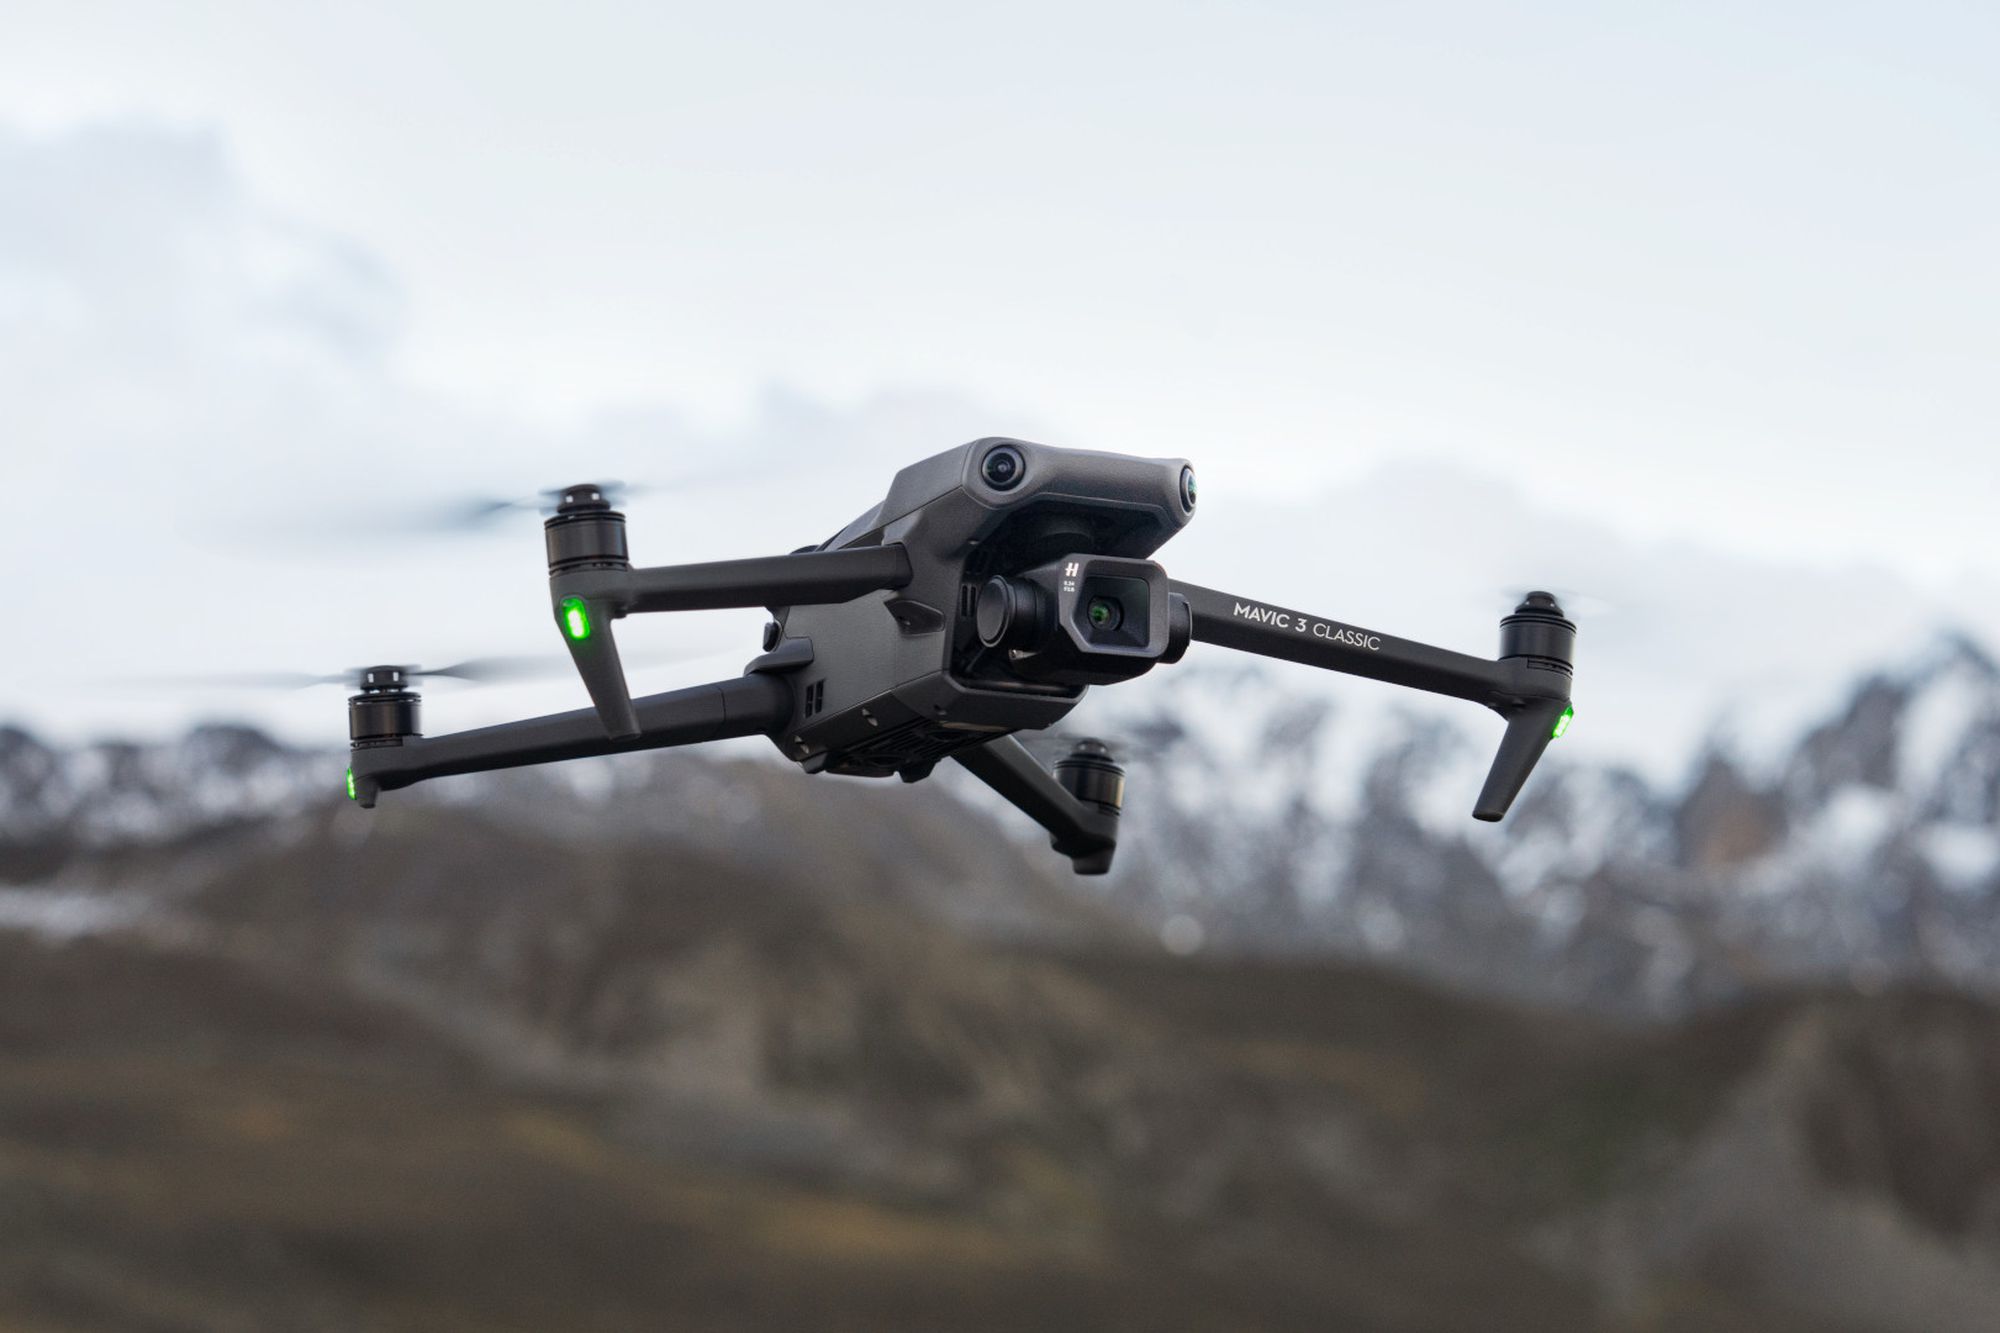 DJI rolls out the Mavic 3 Classic, a ‘relatively affordable’ flagship drone with a Hasselblad camera